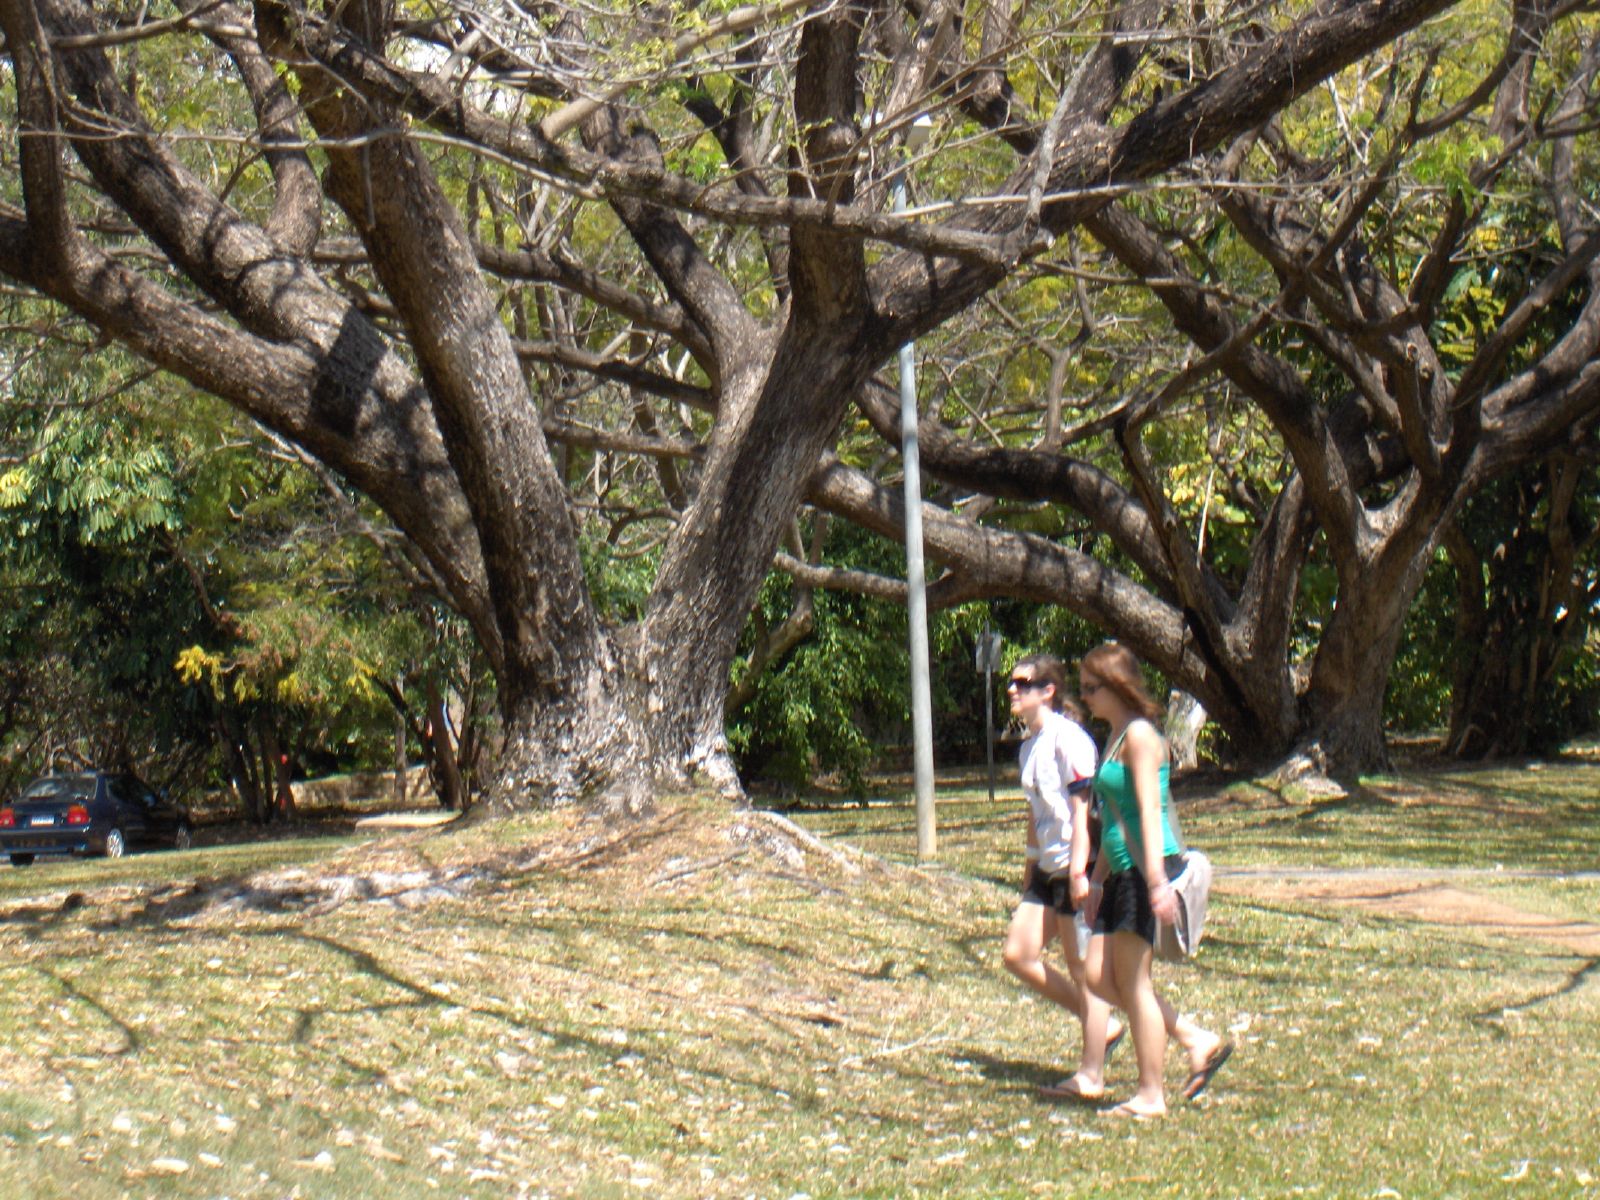 two people are walking next to a tree and one is using a cellphone